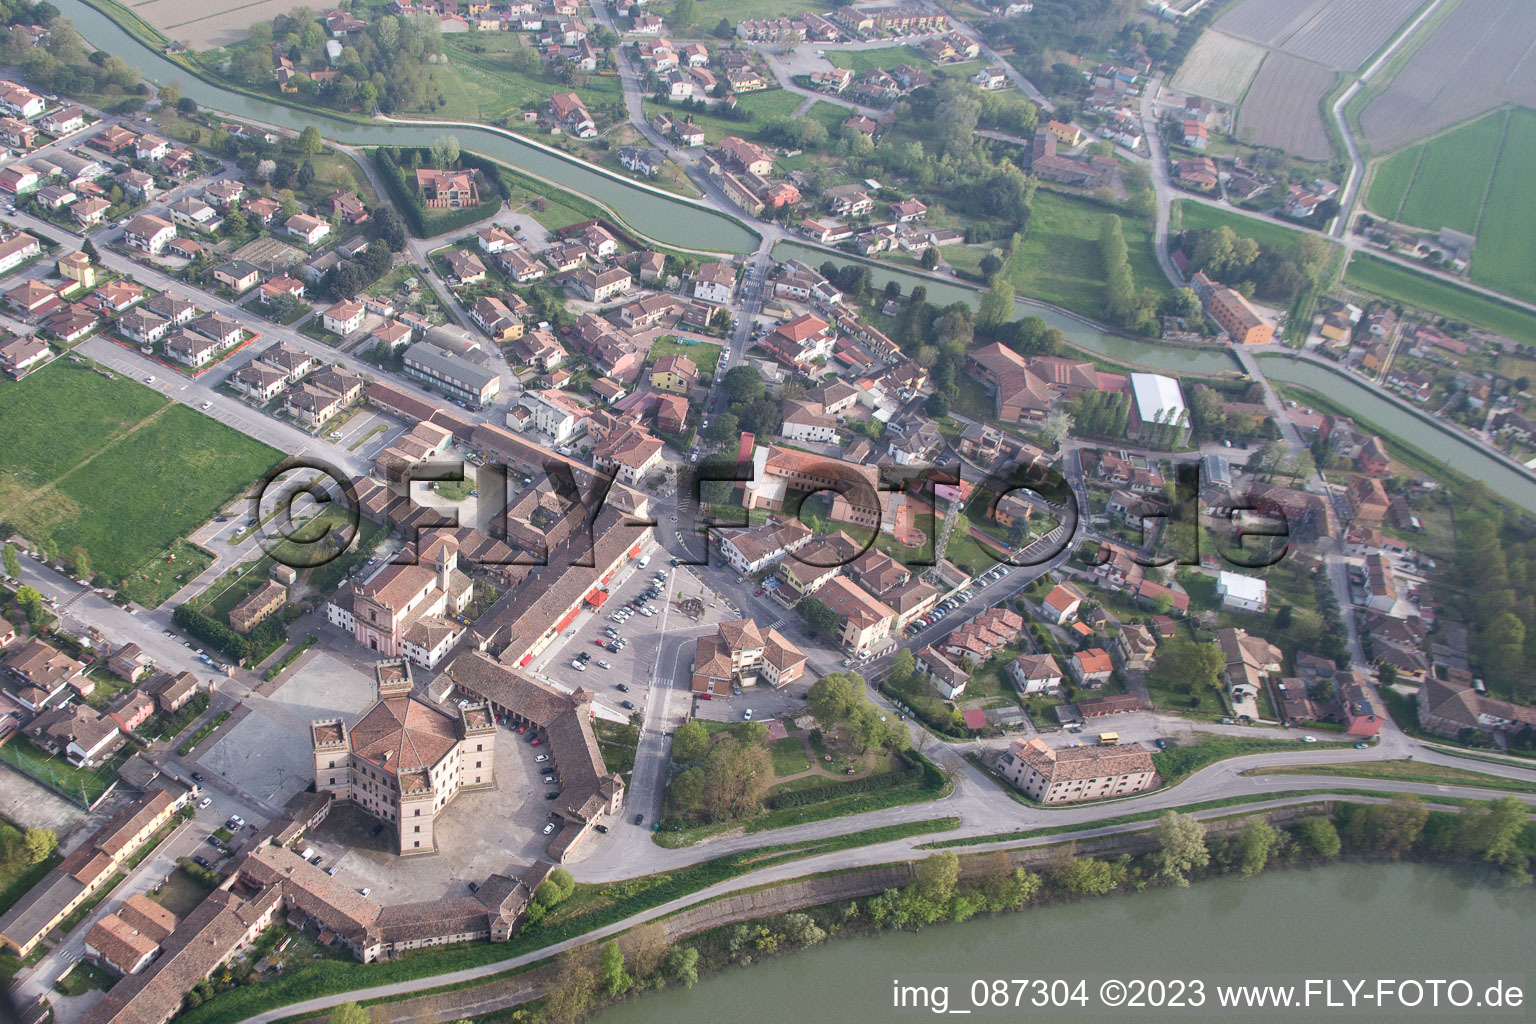 Mesola in the state Emilia Romagna, Italy viewn from the air